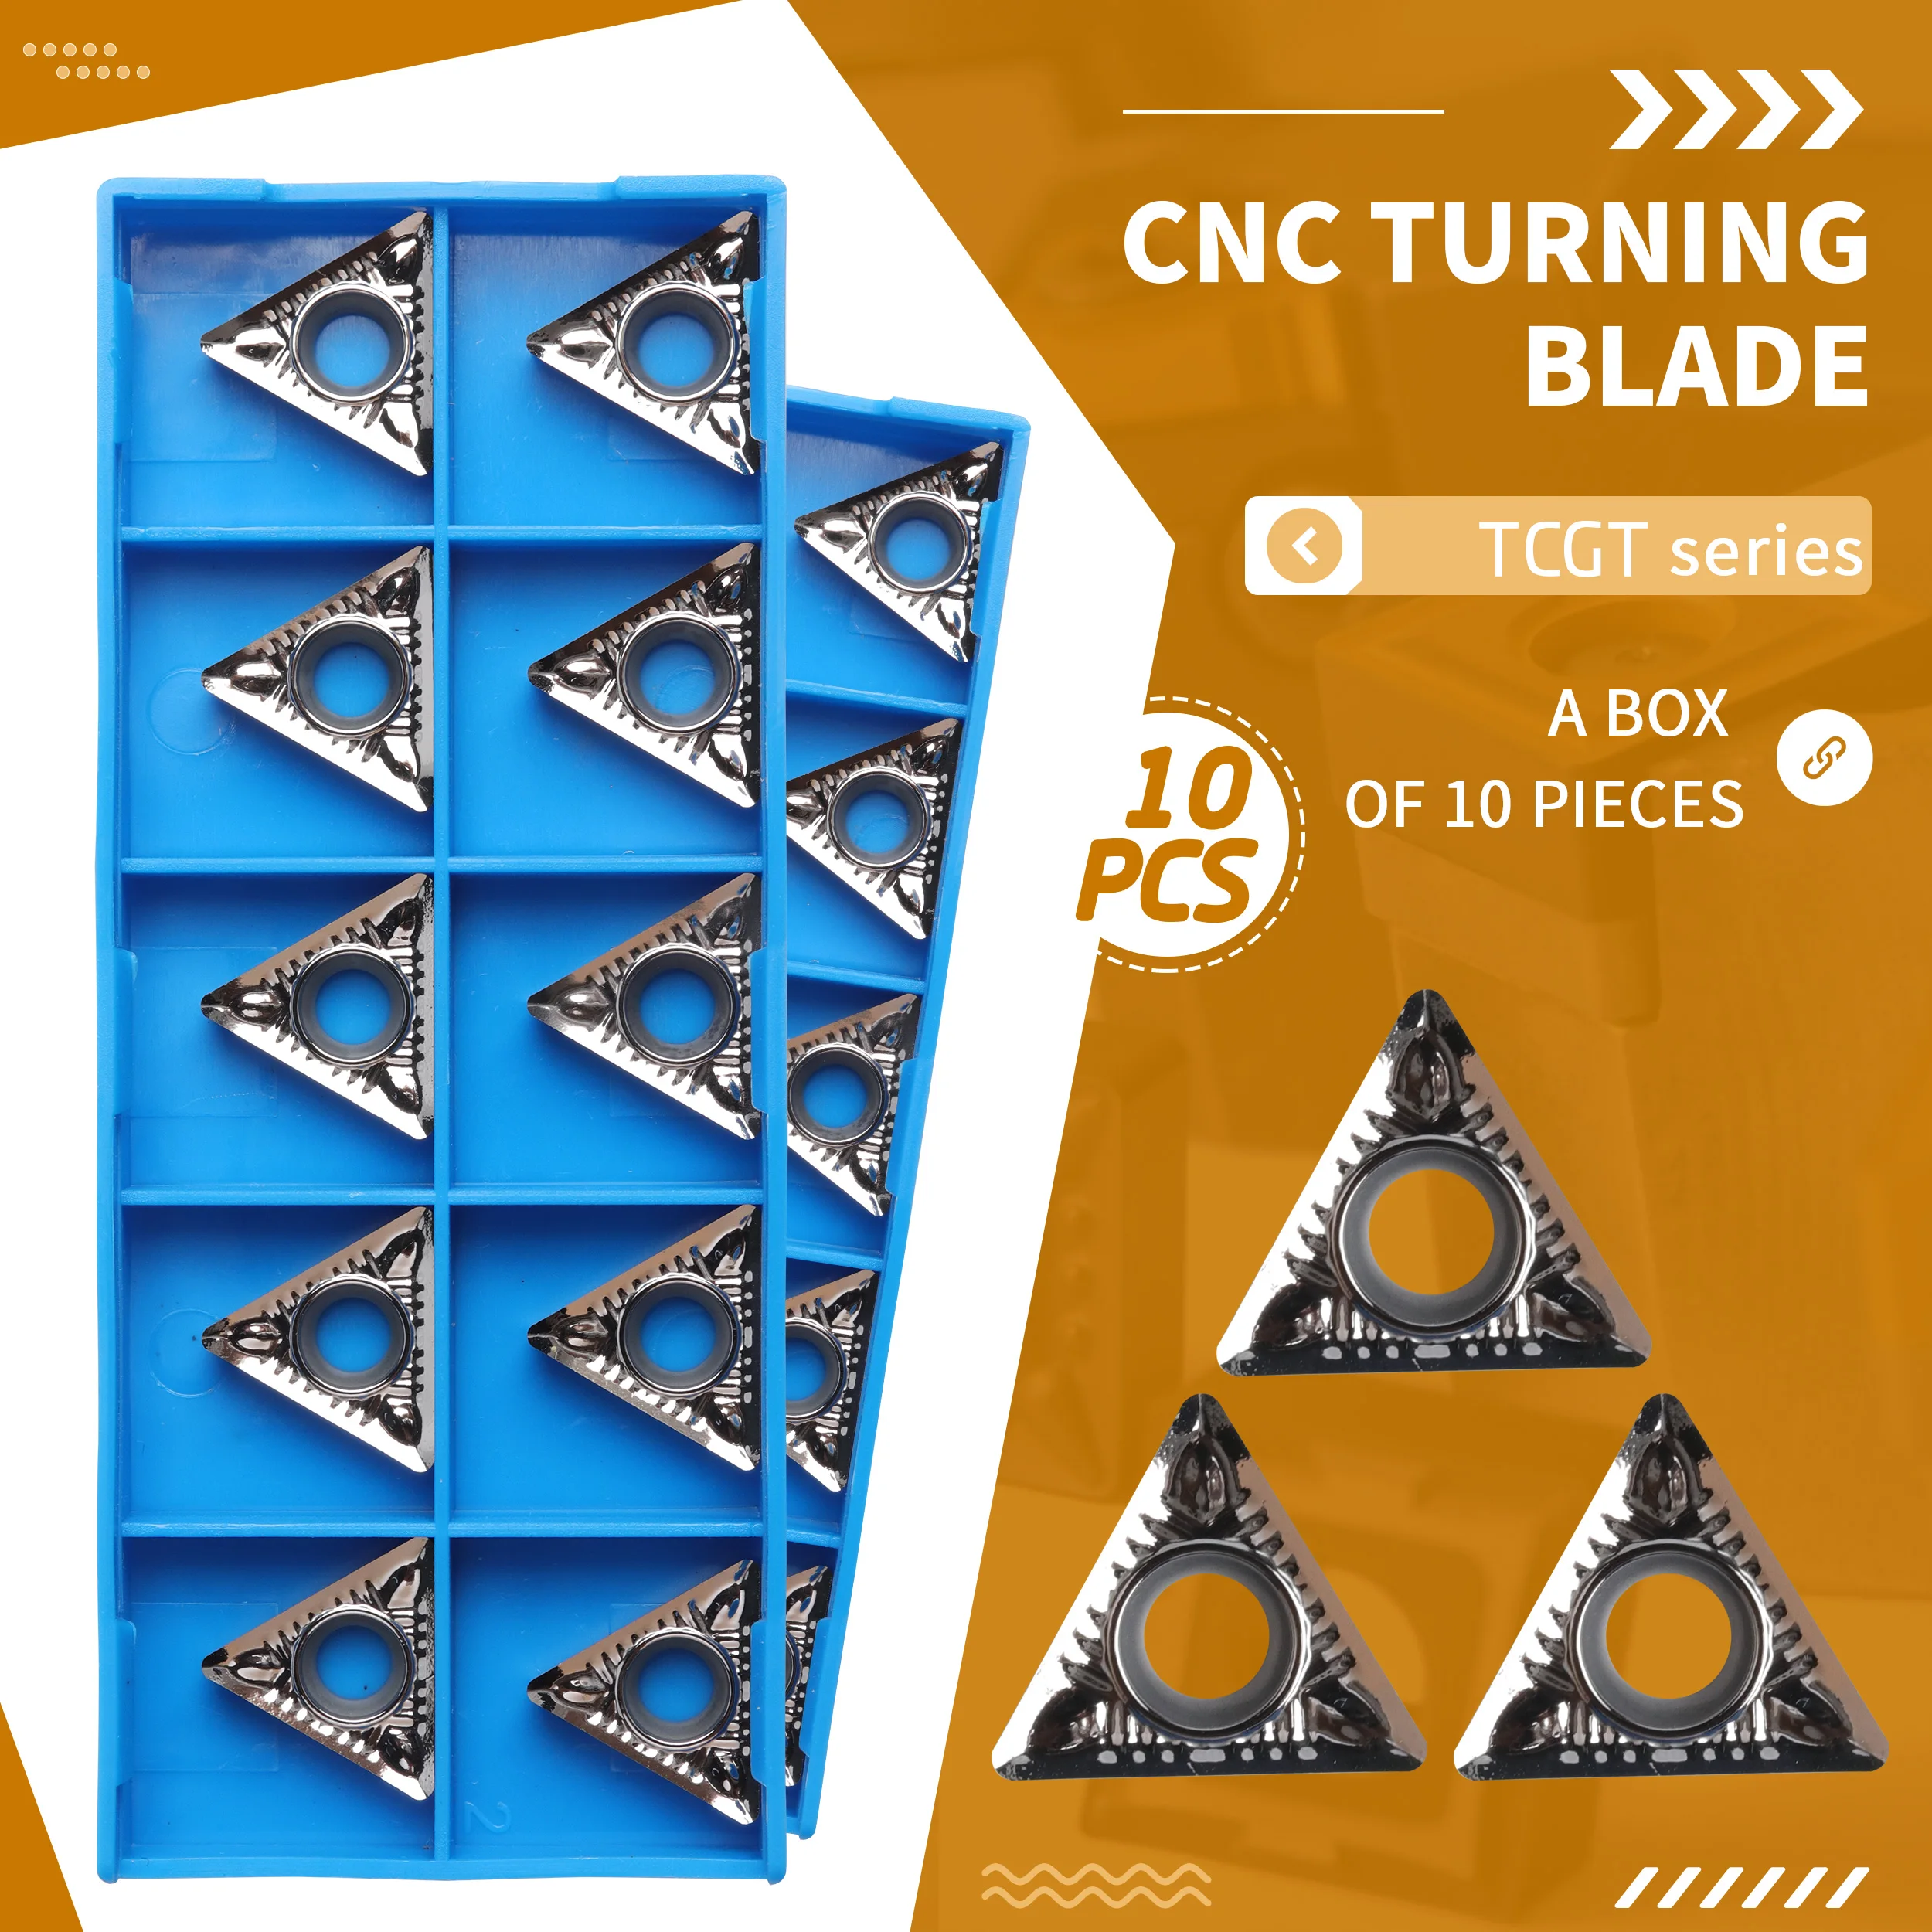 

TCGT16T302 TCGT16T304 TCGT16T308-AK H01 High quality Carbide inserts CNC lathe tools Milling inserts Aluminum tool Turning blade